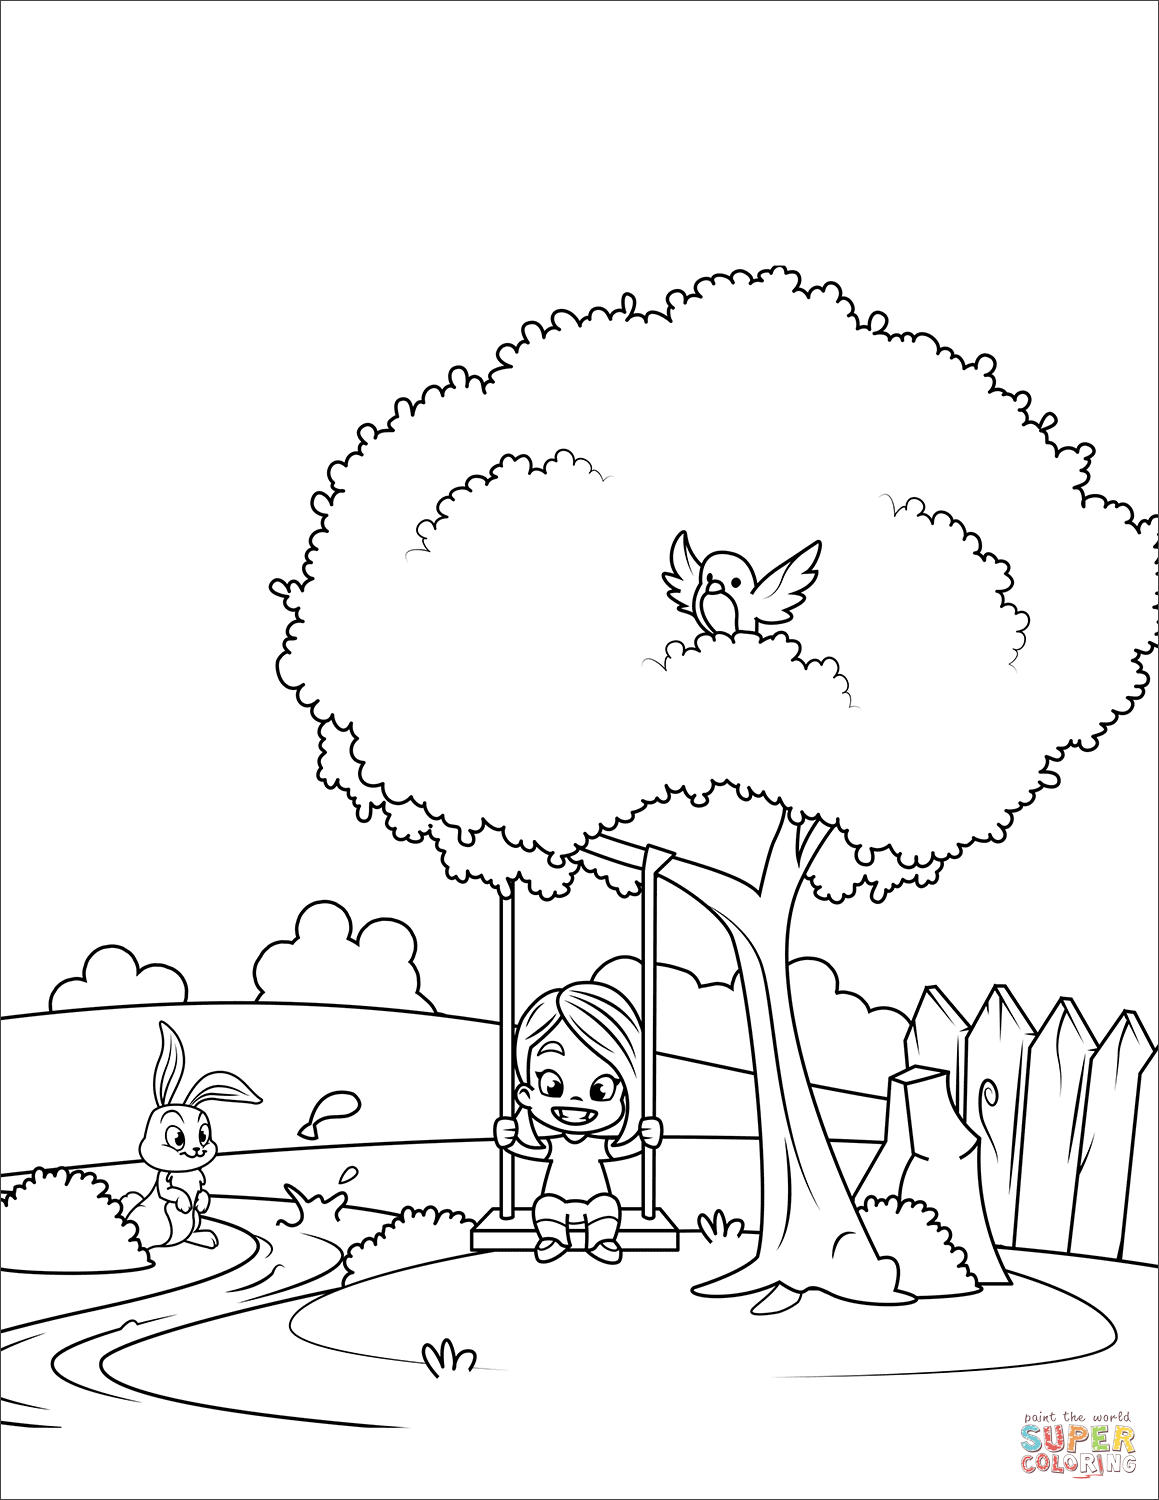 Girl on a Swing coloring page | Free Printable Coloring Pages